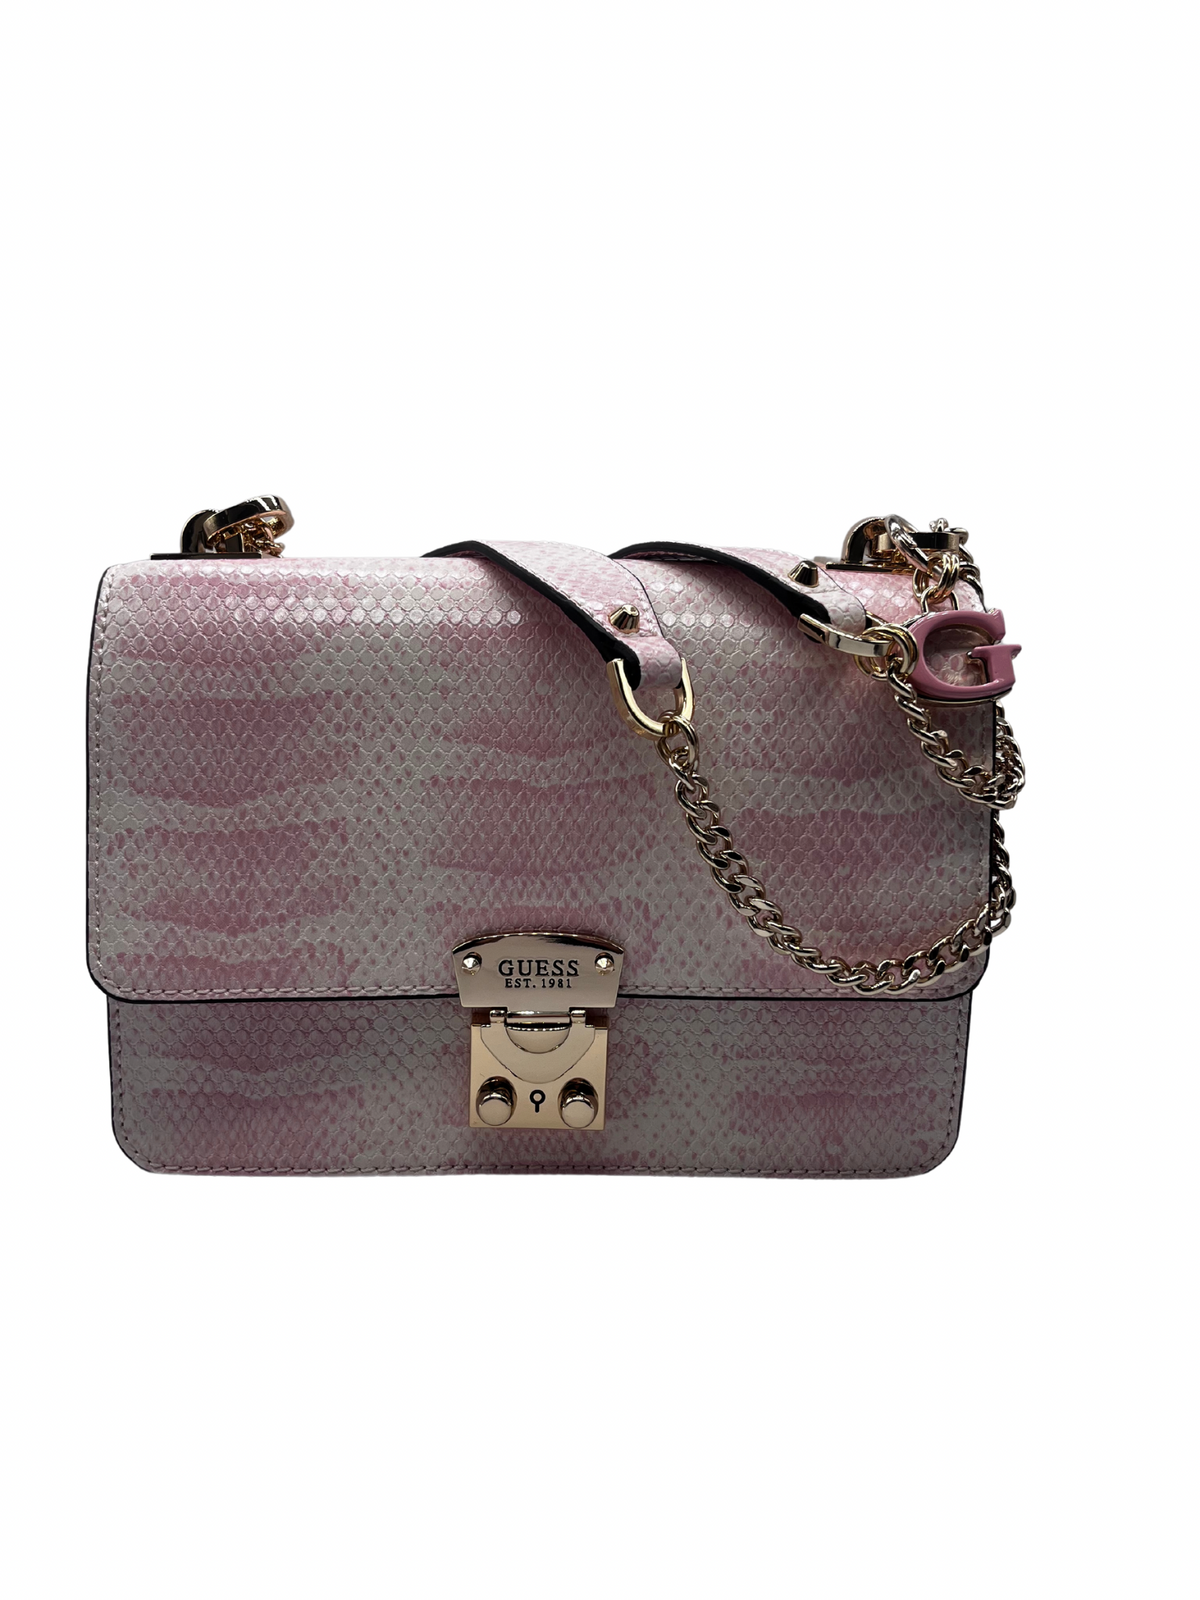 Guess Pink and White Croc Print Crossbody Bag